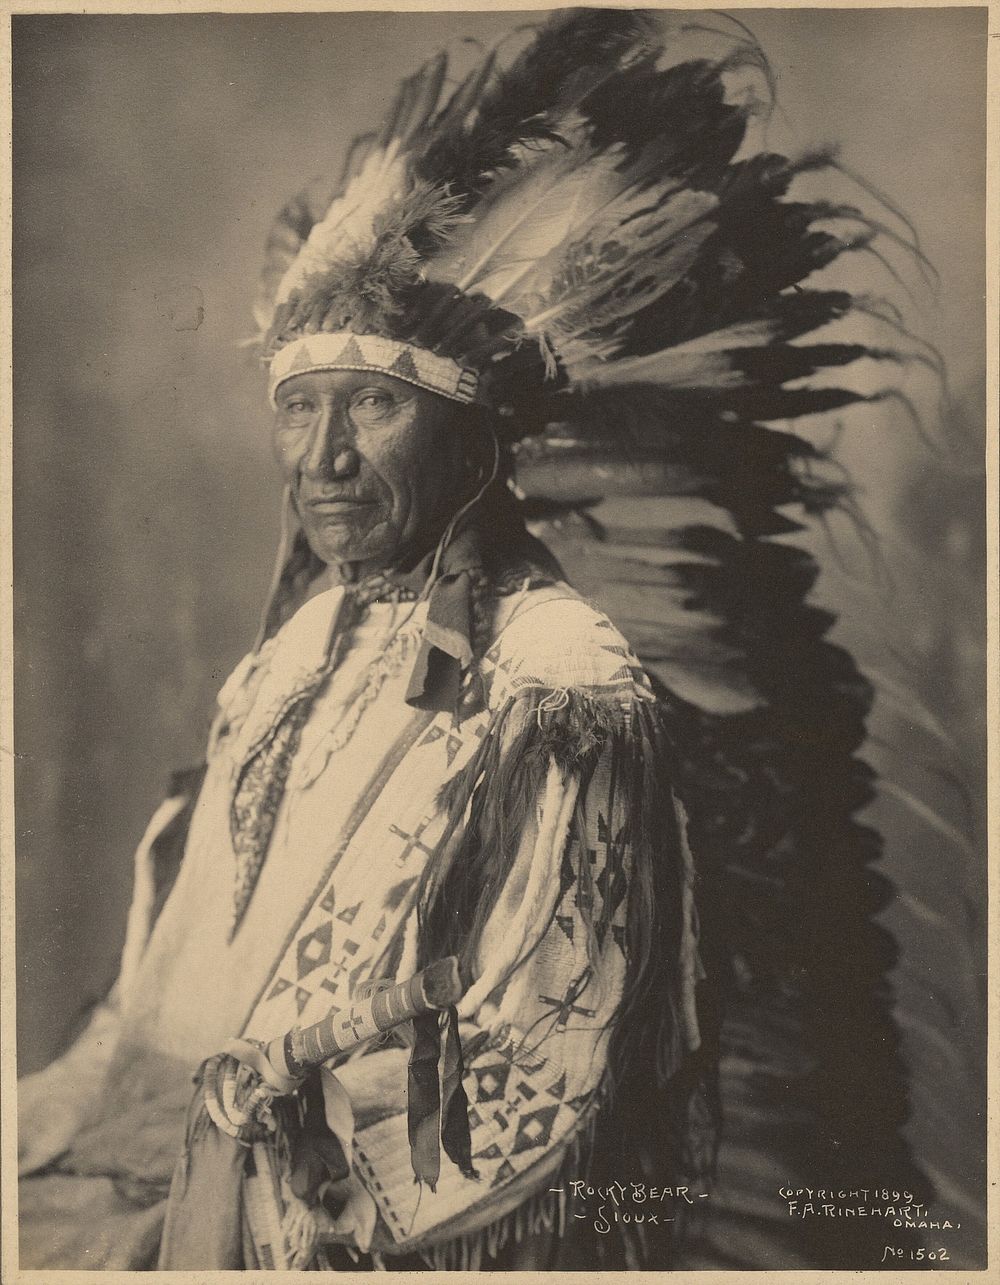 Rocky Bear, Sioux by Adolph F Muhr and Frank A Rinehart